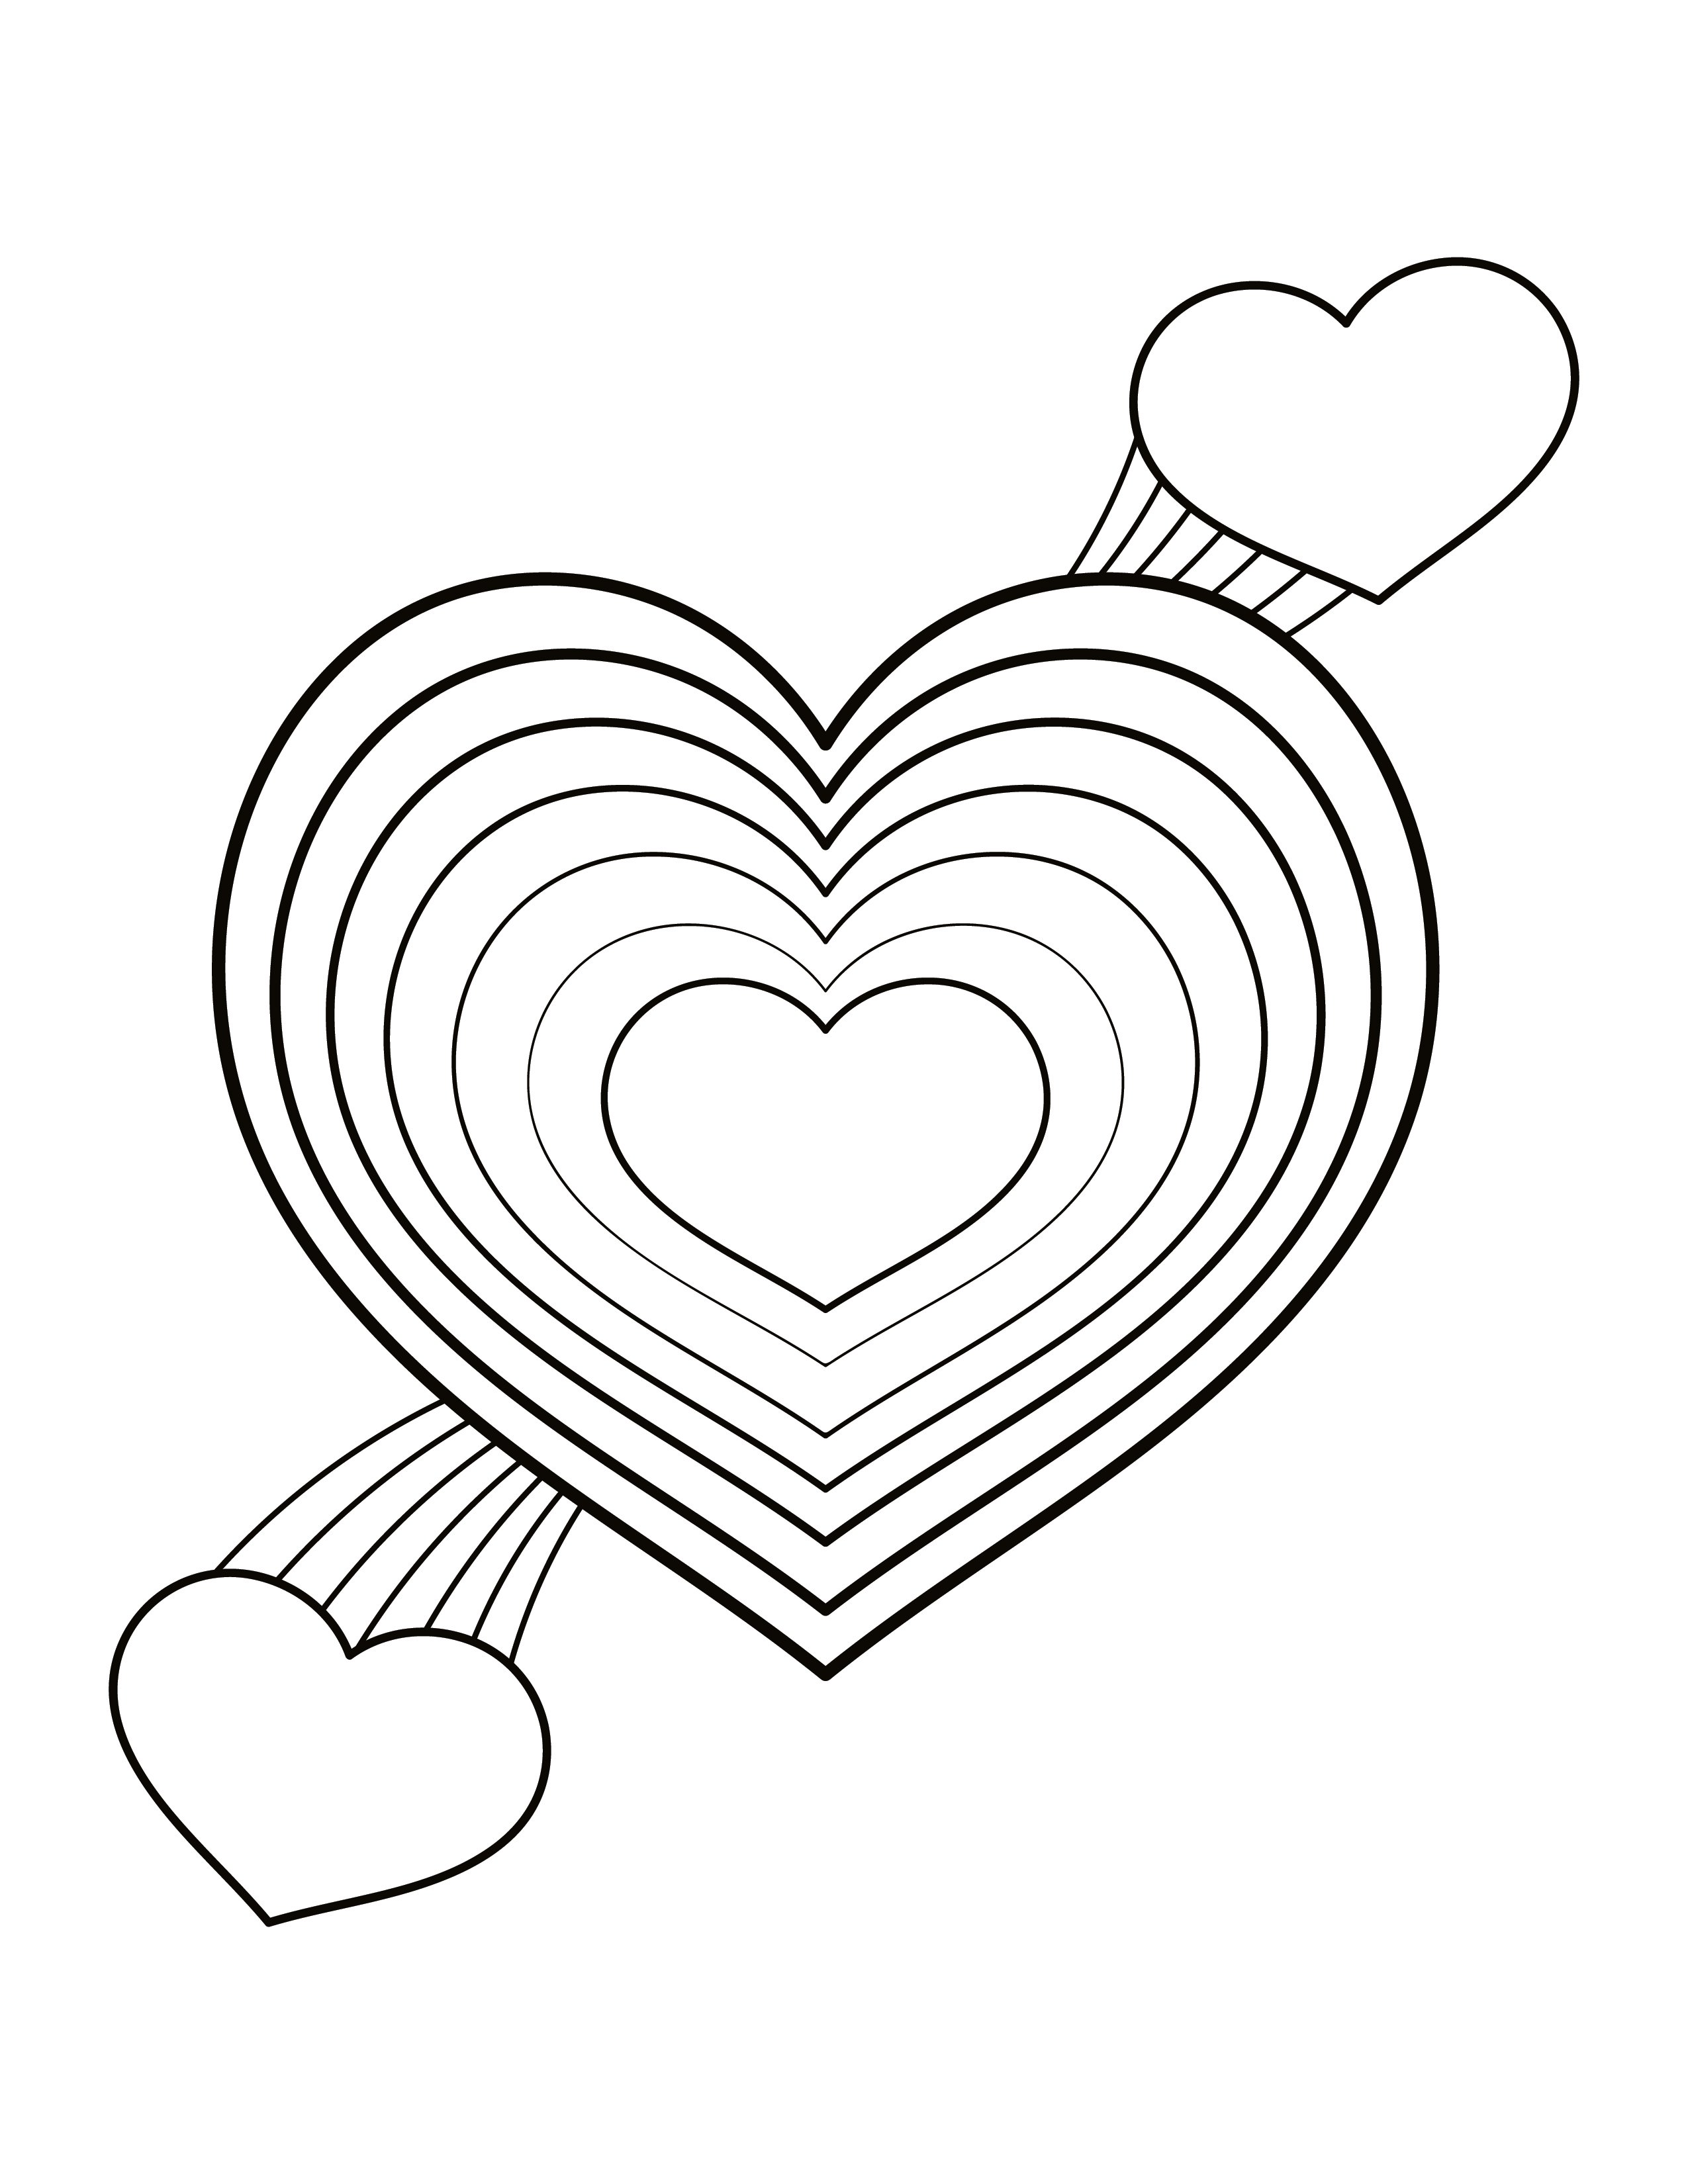 Free Rainbow Heart Coloring Page - EPS, Illustrator, JPG, PNG, PDF, SVG ...